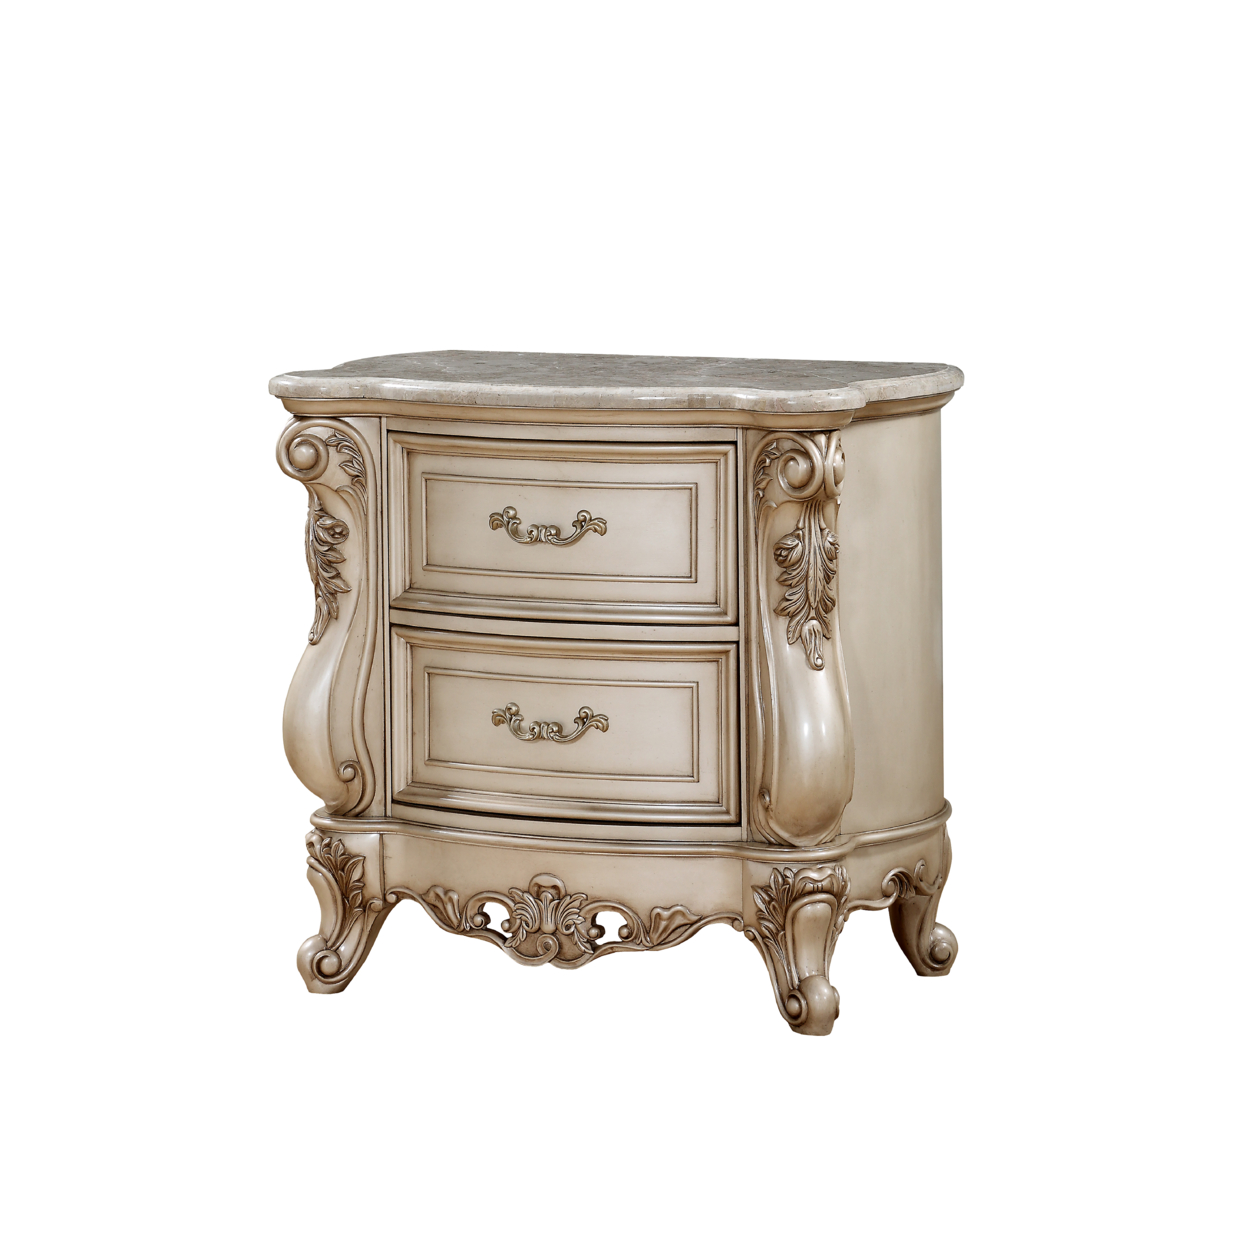 2 Drawer Nightstand With Raised Scrolled Floral Moulding, White- Saltoro Sherpi